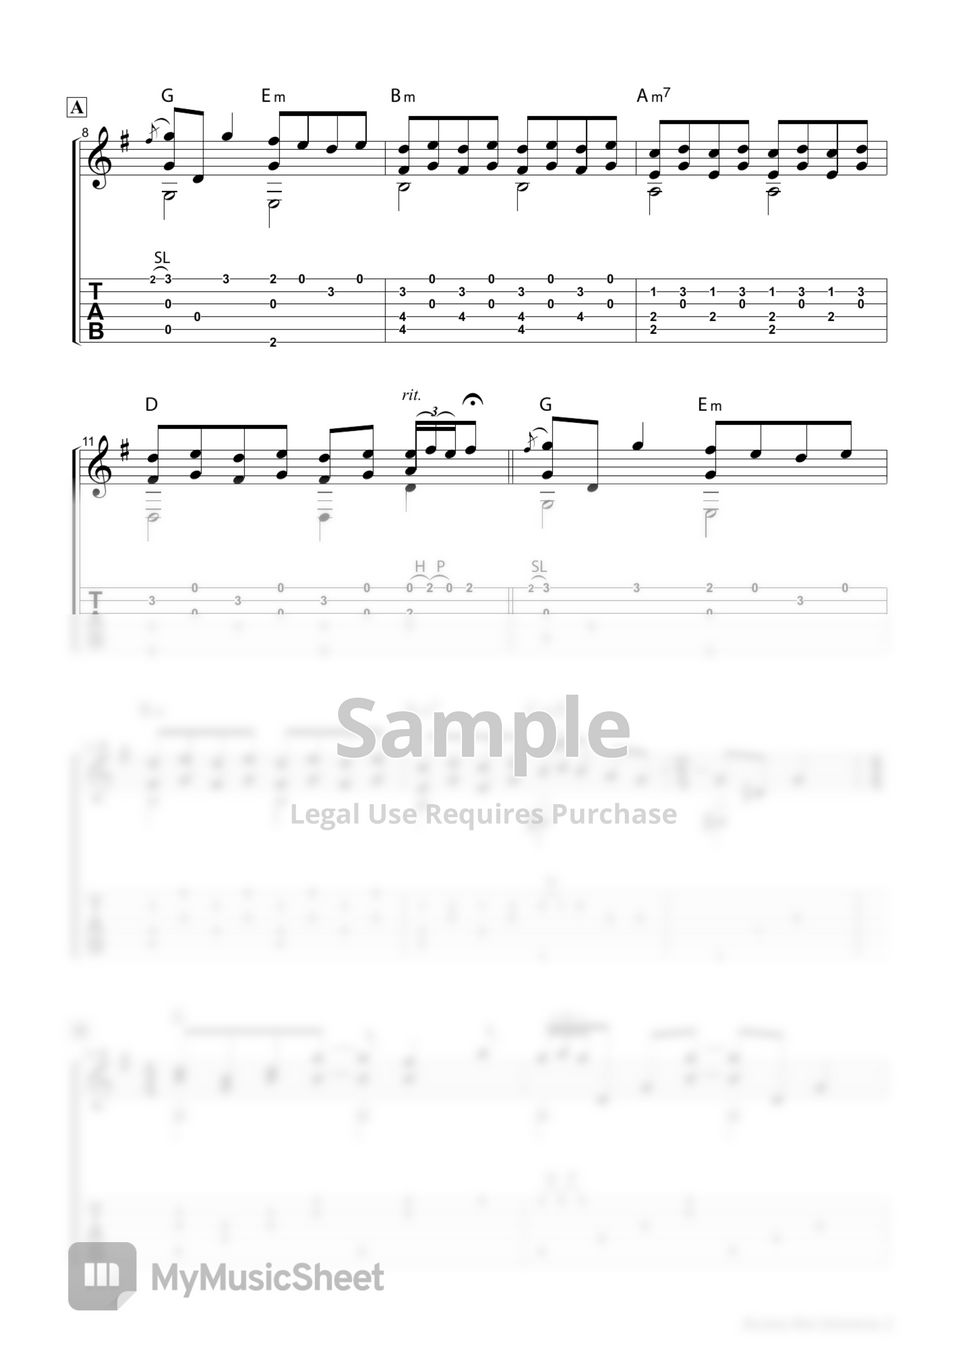 The Beatles - This cover 4 The Beatles all 14 songs TAB Score by Yu Watanabe/わたなべゆう